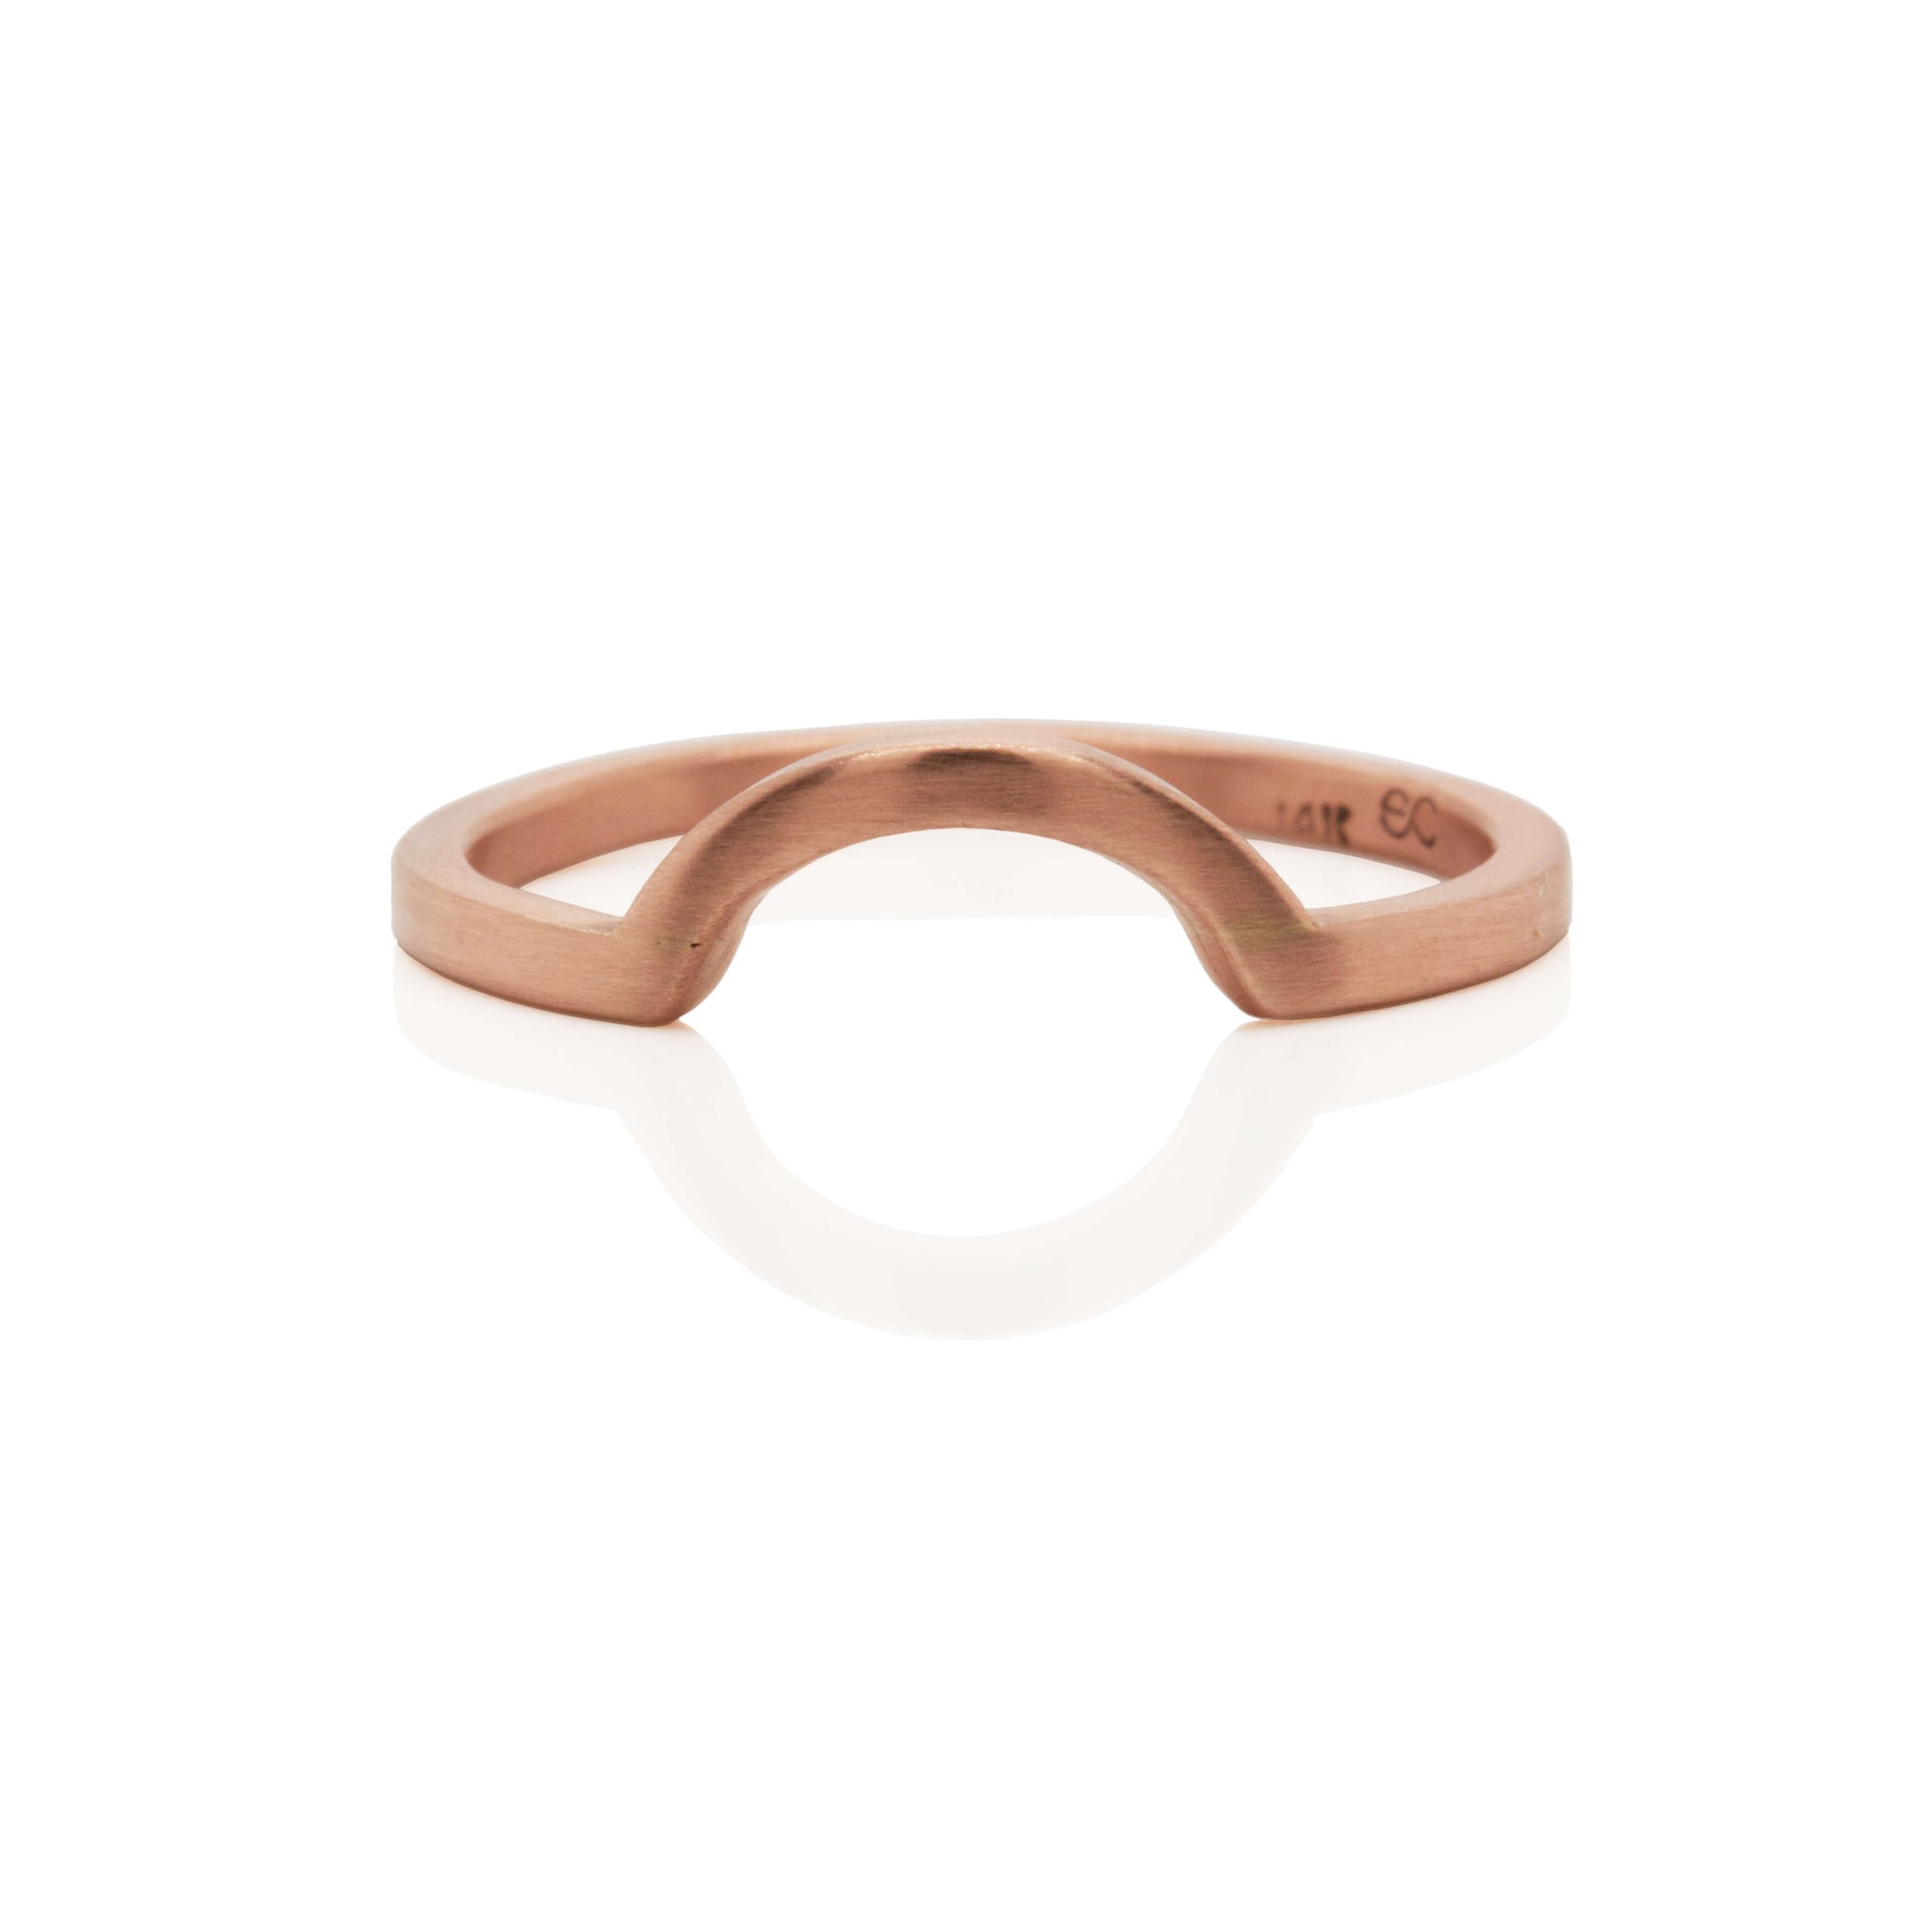 1.5mm Contour Band in 14k Rose Gold